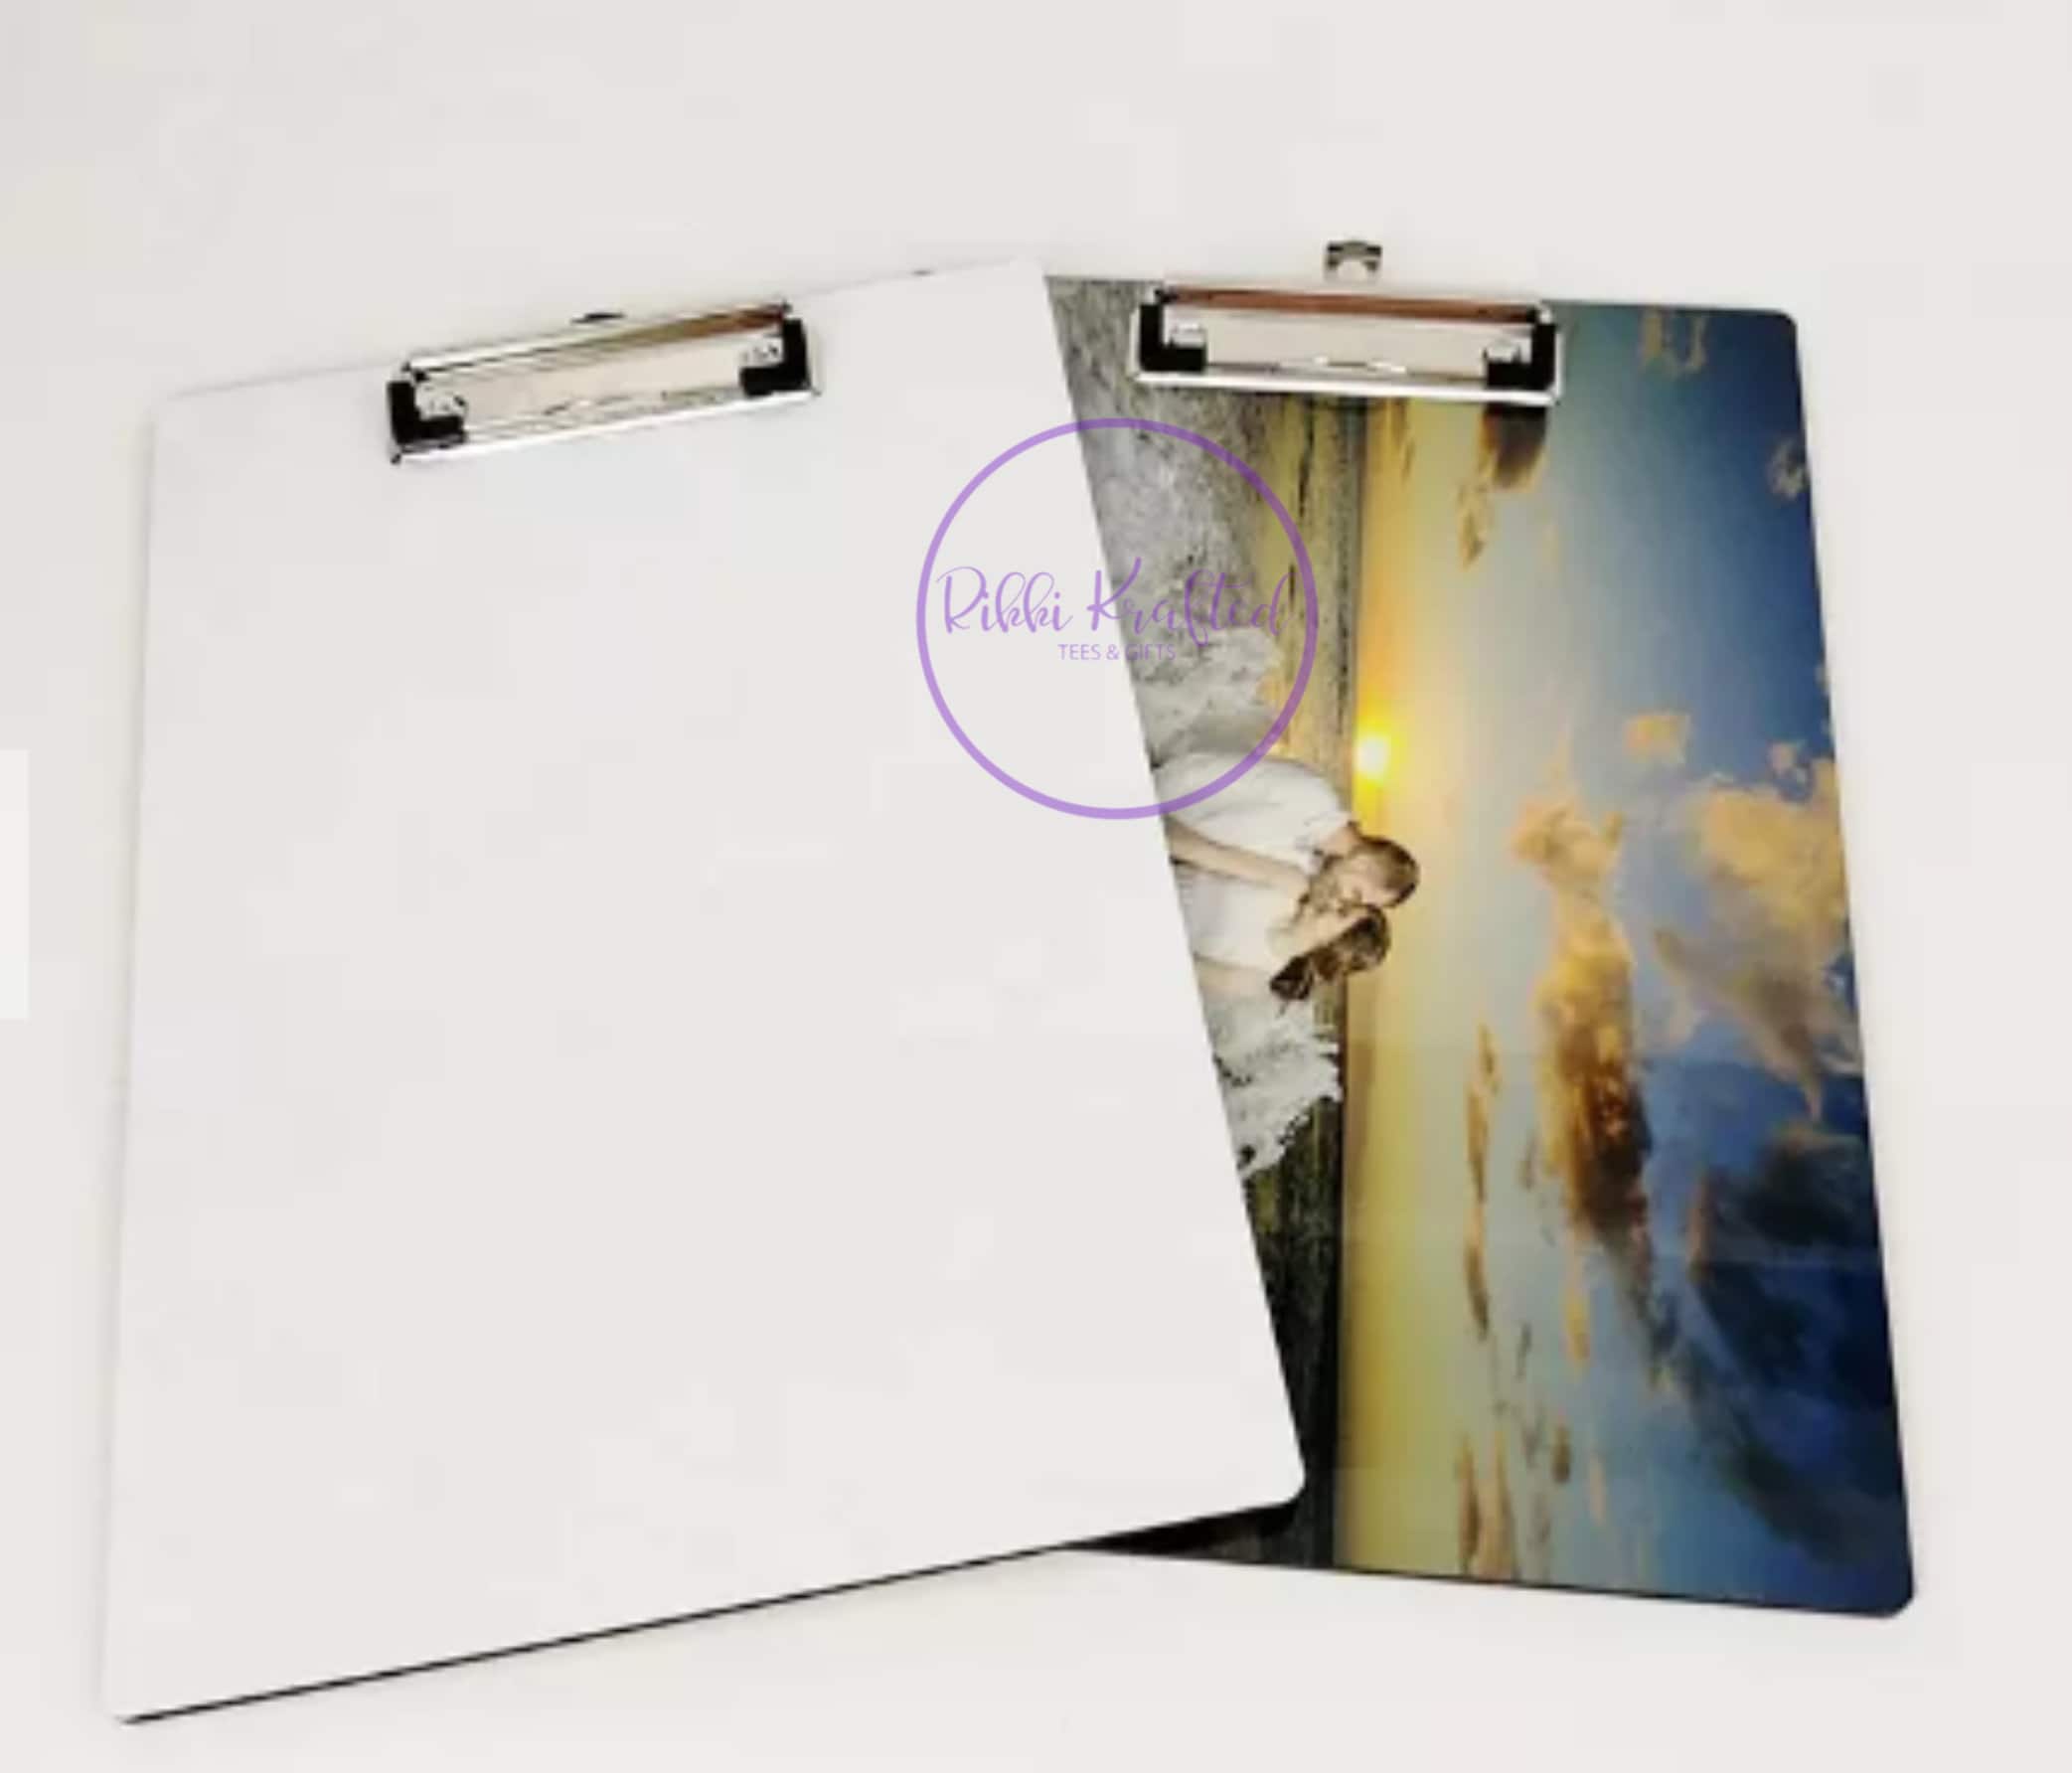 SUBLIMATION 9 X 12-1/2 2-SIDED CLIPBOARD WITH FLAT CLIP